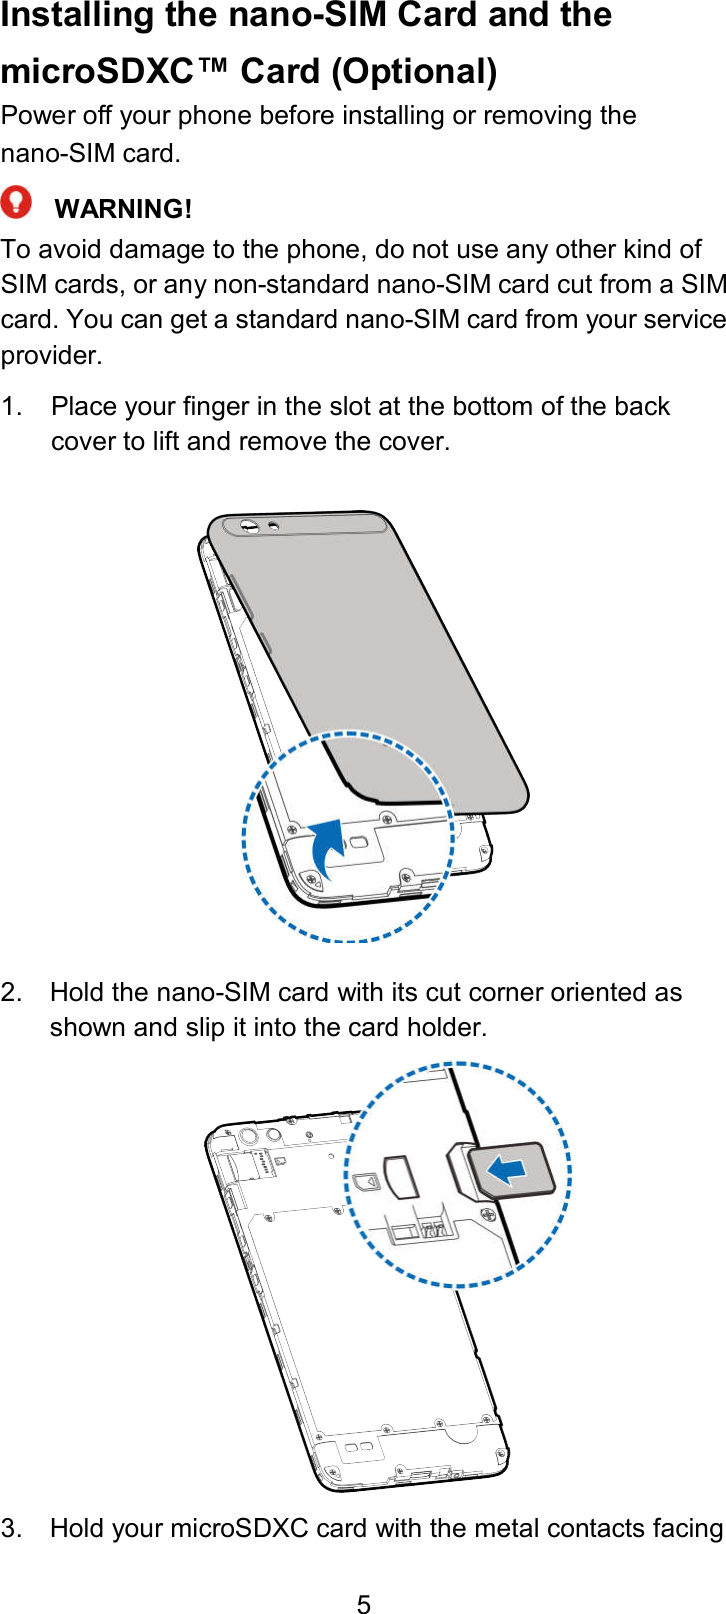  5 Installing the nano-SIM Card and the microSDXC™ Card (Optional) Power off your phone before installing or removing the nano-SIM card.    WARNING! To avoid damage to the phone, do not use any other kind of SIM cards, or any non-standard nano-SIM card cut from a SIM card. You can get a standard nano-SIM card from your service provider. 1.  Place your finger in the slot at the bottom of the back cover to lift and remove the cover.  2.  Hold the nano-SIM card with its cut corner oriented as shown and slip it into the card holder.  3.  Hold your microSDXC card with the metal contacts facing 